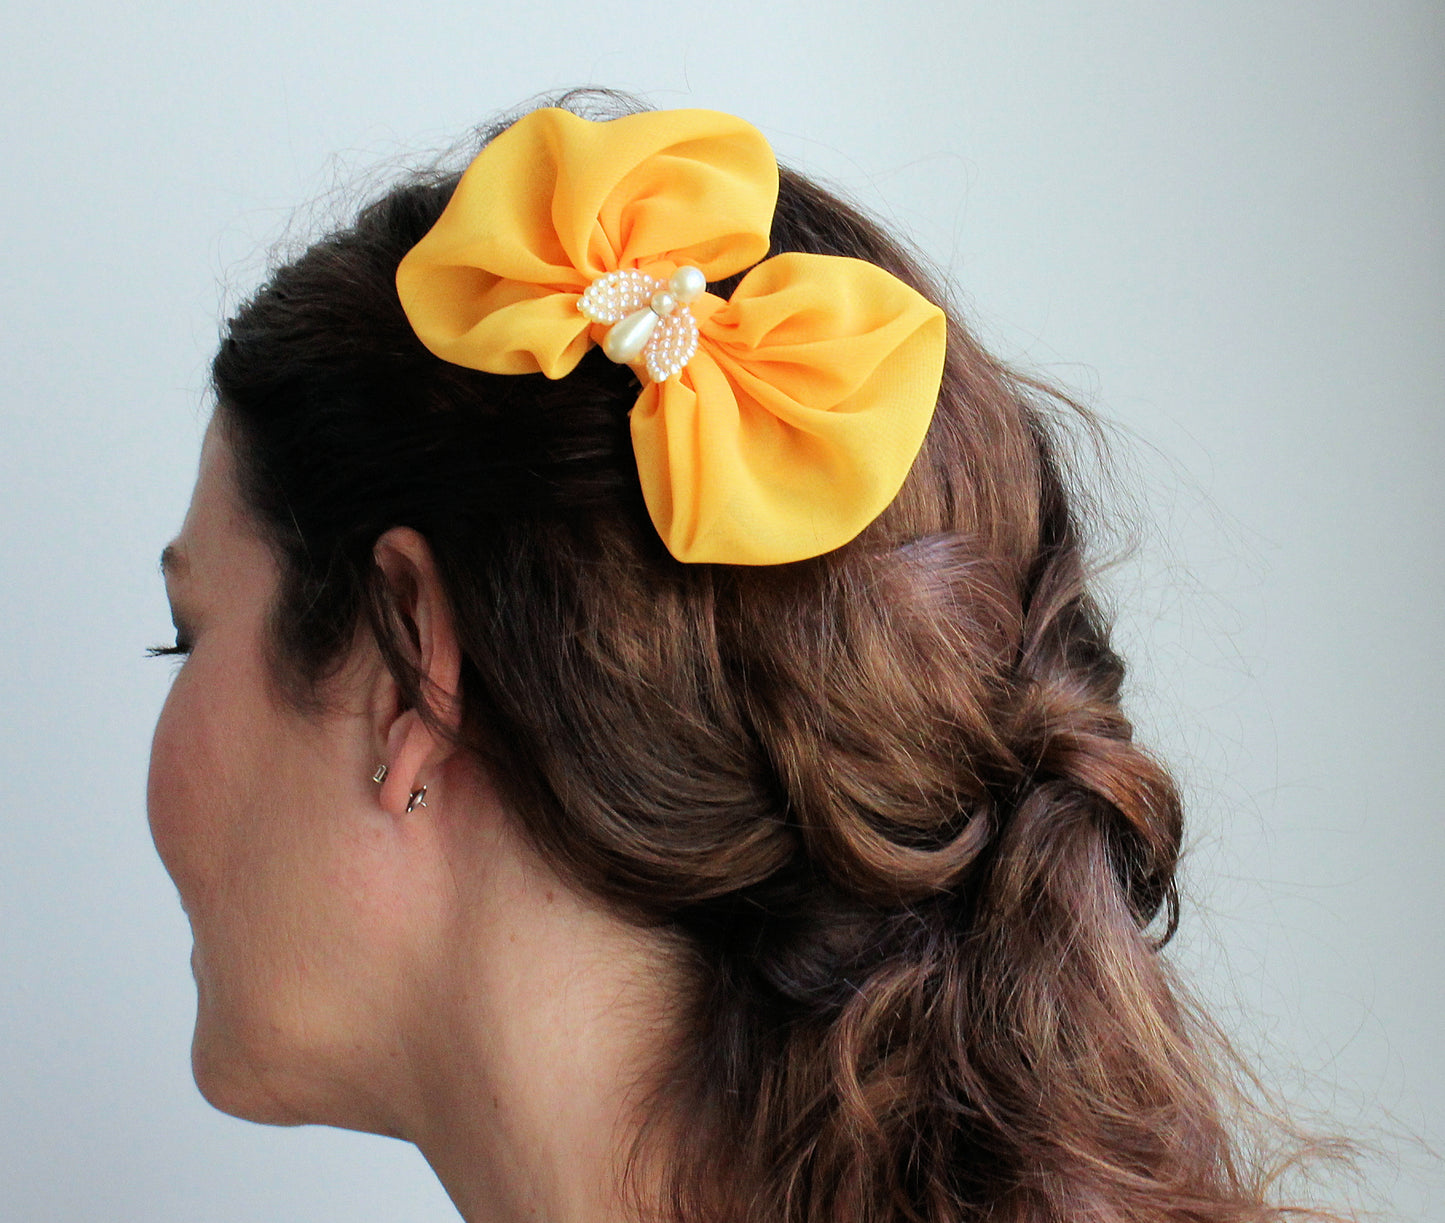 Vintage Inspired Angel Hair Bow on Comb